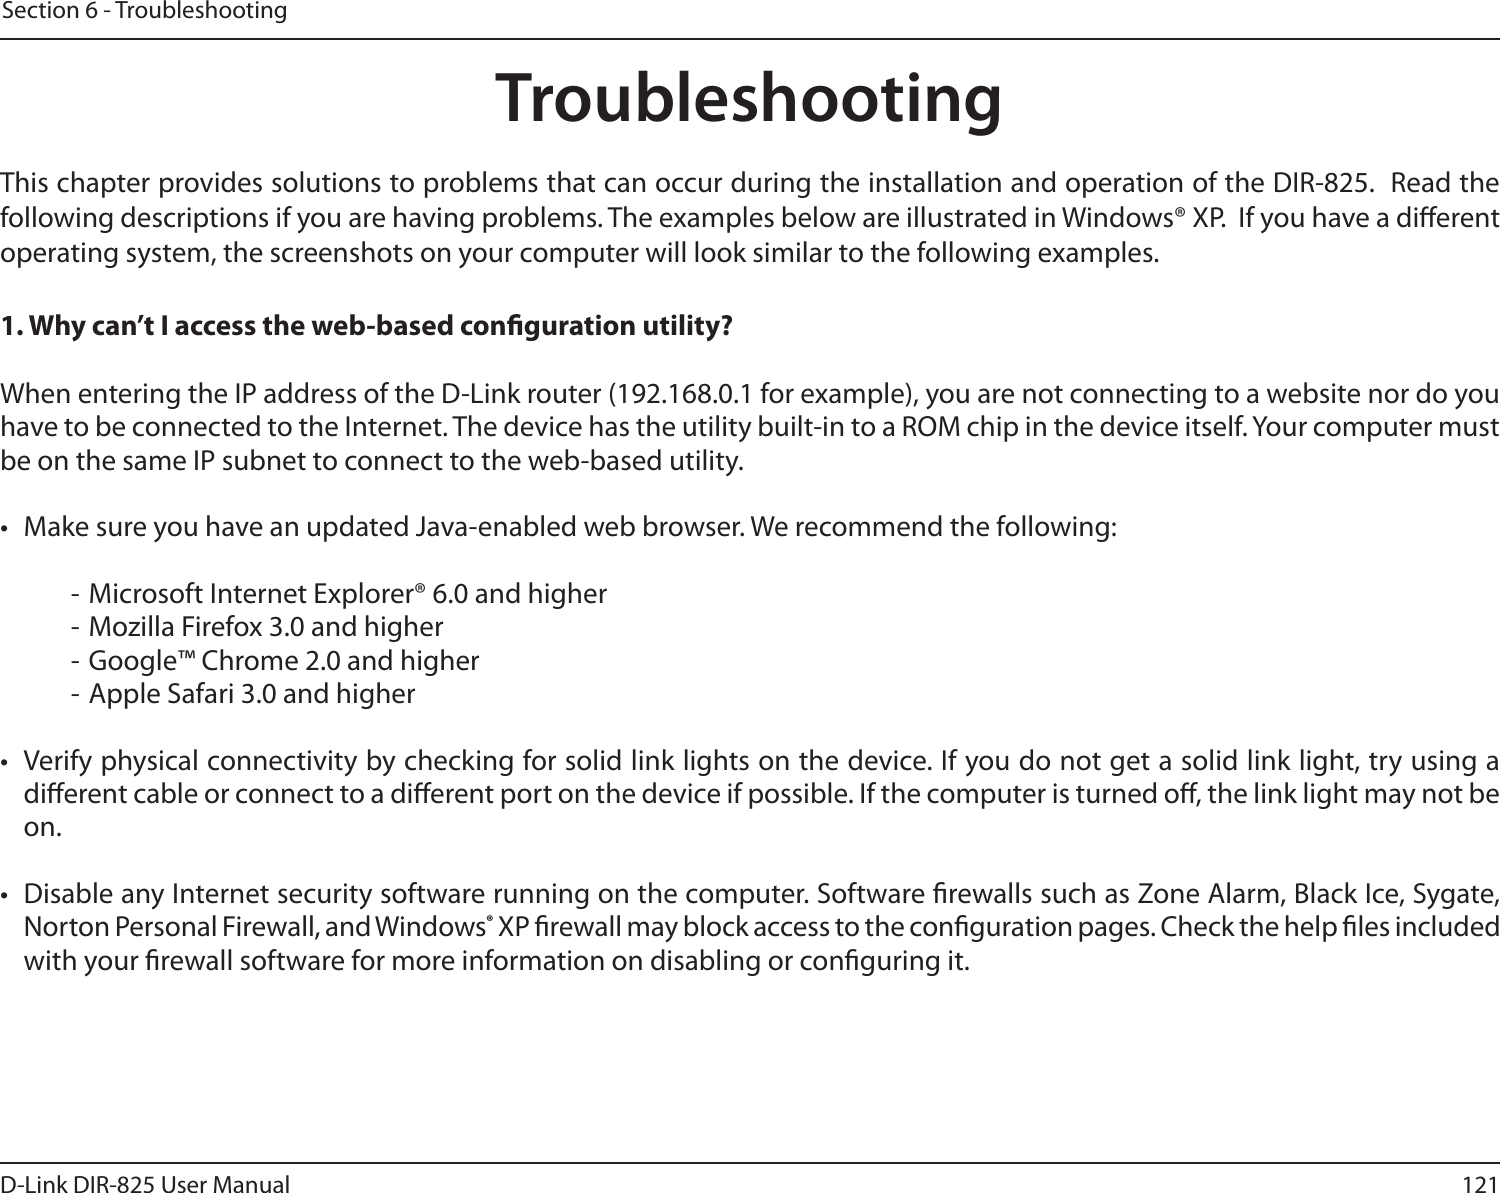 121D-Link DIR-825 User ManualSection 6 - TroubleshootingTroubleshootingThis chapter provides solutions to problems that can occur during the installation and operation of the DIR-825.  Read the following descriptions if you are having problems. The examples below are illustrated in Windows® XP.  If you have a dierent operating system, the screenshots on your computer will look similar to the following examples.1. Why can’t I access the web-based conguration utility?When entering the IP address of the D-Link router (192.168.0.1 for example), you are not connecting to a website nor do you have to be connected to the Internet. The device has the utility built-in to a ROM chip in the device itself. Your computer must be on the same IP subnet to connect to the web-based utility. •  Make sure you have an updated Java-enabled web browser. We recommend the following:  - Microsoft Internet Explorer® 6.0 and higher- Mozilla Firefox 3.0 and higher- Google™ Chrome 2.0 and higher- Apple Safari 3.0 and higher•  Verify physical connectivity by checking for solid link lights on the device. If you do not get a solid link light, try using a dierent cable or connect to a dierent port on the device if possible. If the computer is turned o, the link light may not be on.•  Disable any Internet security software running on the computer. Software rewalls such as Zone Alarm, Black Ice, Sygate, Norton Personal Firewall, and Windows® XP rewall may block access to the conguration pages. Check the help les included with your rewall software for more information on disabling or conguring it.